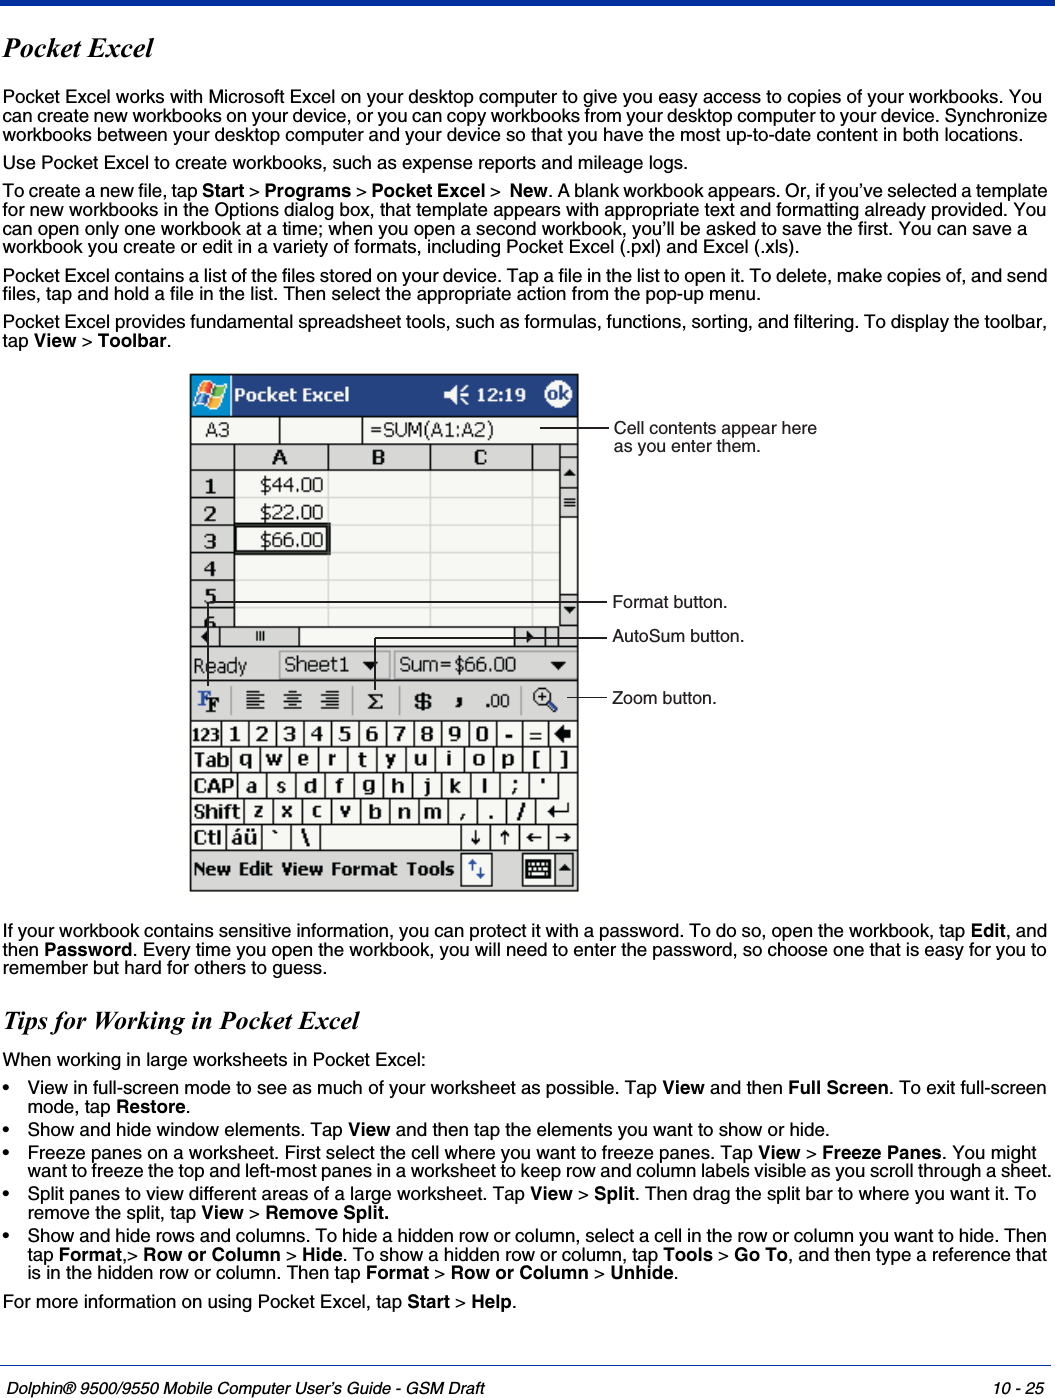 Dolphin® 9500/9550 Mobile Computer User’s Guide - GSM Draft 10 - 25Pocket ExcelPocket Excel works with Microsoft Excel on your desktop computer to give you easy access to copies of your workbooks. You can create new workbooks on your device, or you can copy workbooks from your desktop computer to your device. Synchronize workbooks between your desktop computer and your device so that you have the most up-to-date content in both locations.Use Pocket Excel to create workbooks, such as expense reports and mileage logs. To create a new file, tap Start &gt; Programs &gt; Pocket Excel &gt;  New. A blank workbook appears. Or, if you’ve selected a template for new workbooks in the Options dialog box, that template appears with appropriate text and formatting already provided. You can open only one workbook at a time; when you open a second workbook, you’ll be asked to save the first. You can save a workbook you create or edit in a variety of formats, including Pocket Excel (.pxl) and Excel (.xls).Pocket Excel contains a list of the files stored on your device. Tap a file in the list to open it. To delete, make copies of, and send files, tap and hold a file in the list. Then select the appropriate action from the pop-up menu.Pocket Excel provides fundamental spreadsheet tools, such as formulas, functions, sorting, and filtering. To display the toolbar, tap View &gt; Toolbar. If your workbook contains sensitive information, you can protect it with a password. To do so, open the workbook, tap Edit, and then Password. Every time you open the workbook, you will need to enter the password, so choose one that is easy for you to remember but hard for others to guess.Tips for Working in Pocket ExcelWhen working in large worksheets in Pocket Excel:• View in full-screen mode to see as much of your worksheet as possible. Tap View and then Full Screen. To exit full-screen mode, tap Restore.• Show and hide window elements. Tap View and then tap the elements you want to show or hide.• Freeze panes on a worksheet. First select the cell where you want to freeze panes. Tap View &gt; Freeze Panes. You might want to freeze the top and left-most panes in a worksheet to keep row and column labels visible as you scroll through a sheet.• Split panes to view different areas of a large worksheet. Tap View &gt; Split. Then drag the split bar to where you want it. To remove the split, tap View &gt; Remove Split.• Show and hide rows and columns. To hide a hidden row or column, select a cell in the row or column you want to hide. Then tap Format,&gt; Row or Column &gt; Hide. To show a hidden row or column, tap Tools &gt; Go To, and then type a reference that is in the hidden row or column. Then tap Format &gt; Row or Column &gt; Unhide.For more information on using Pocket Excel, tap Start &gt; Help.Cell contents appear hereas you enter them.AutoSum button.Format button.Zoom button.